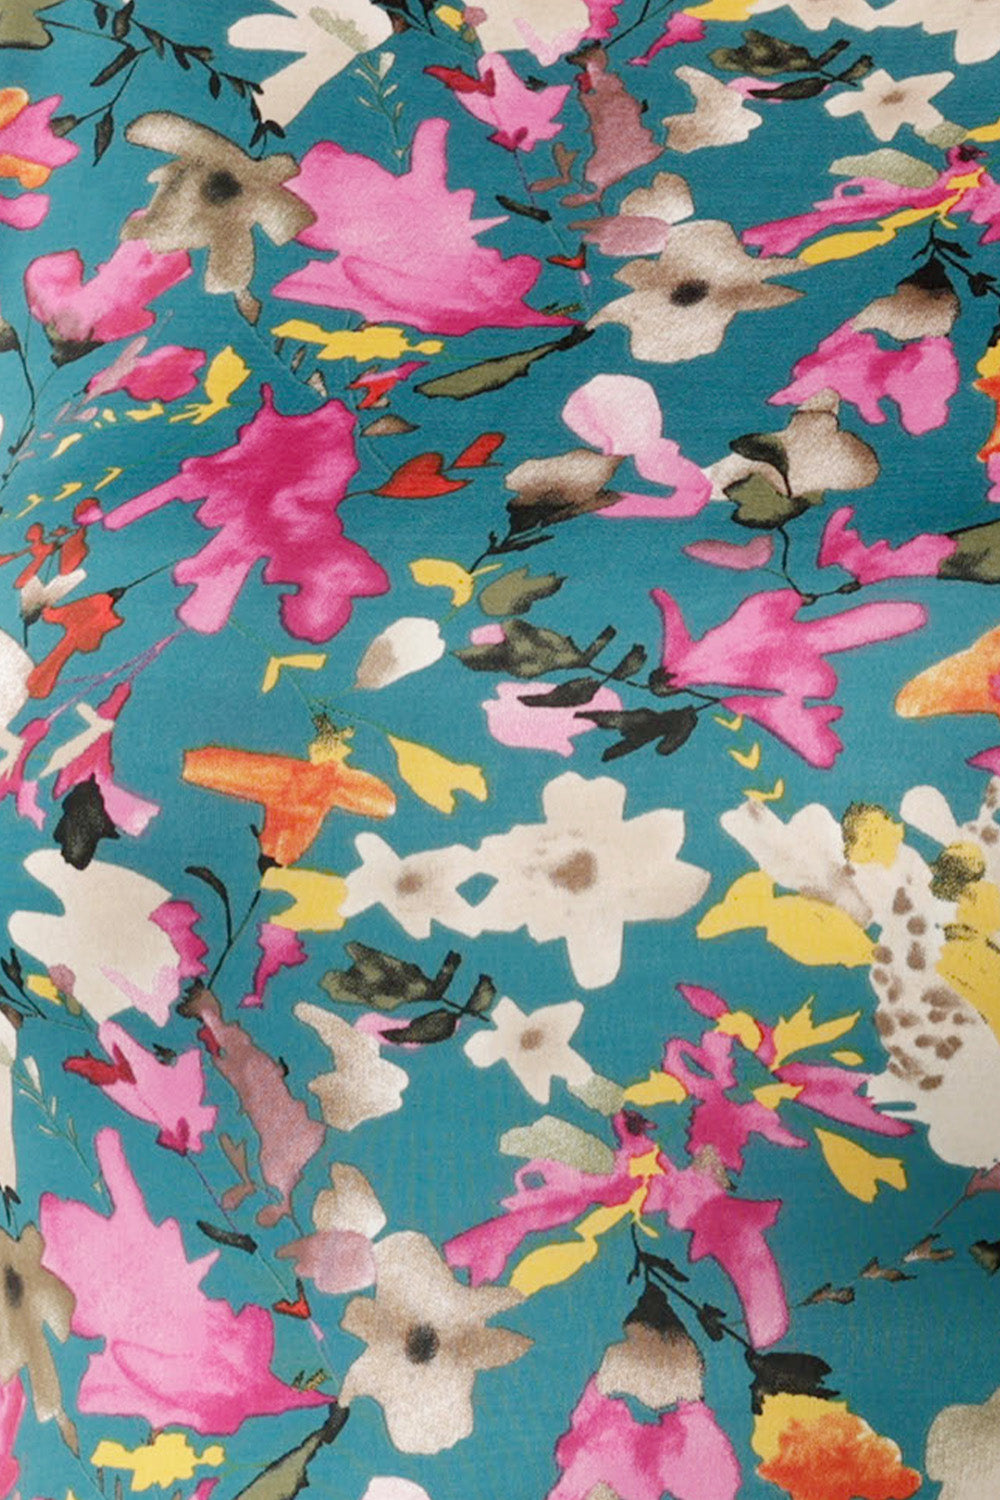 swatch of a floral print on slinky jersey fabric used to Australian-made clothing brand, Leina and Fleur for a range of work wear tops and dresses for petite to plus size women.